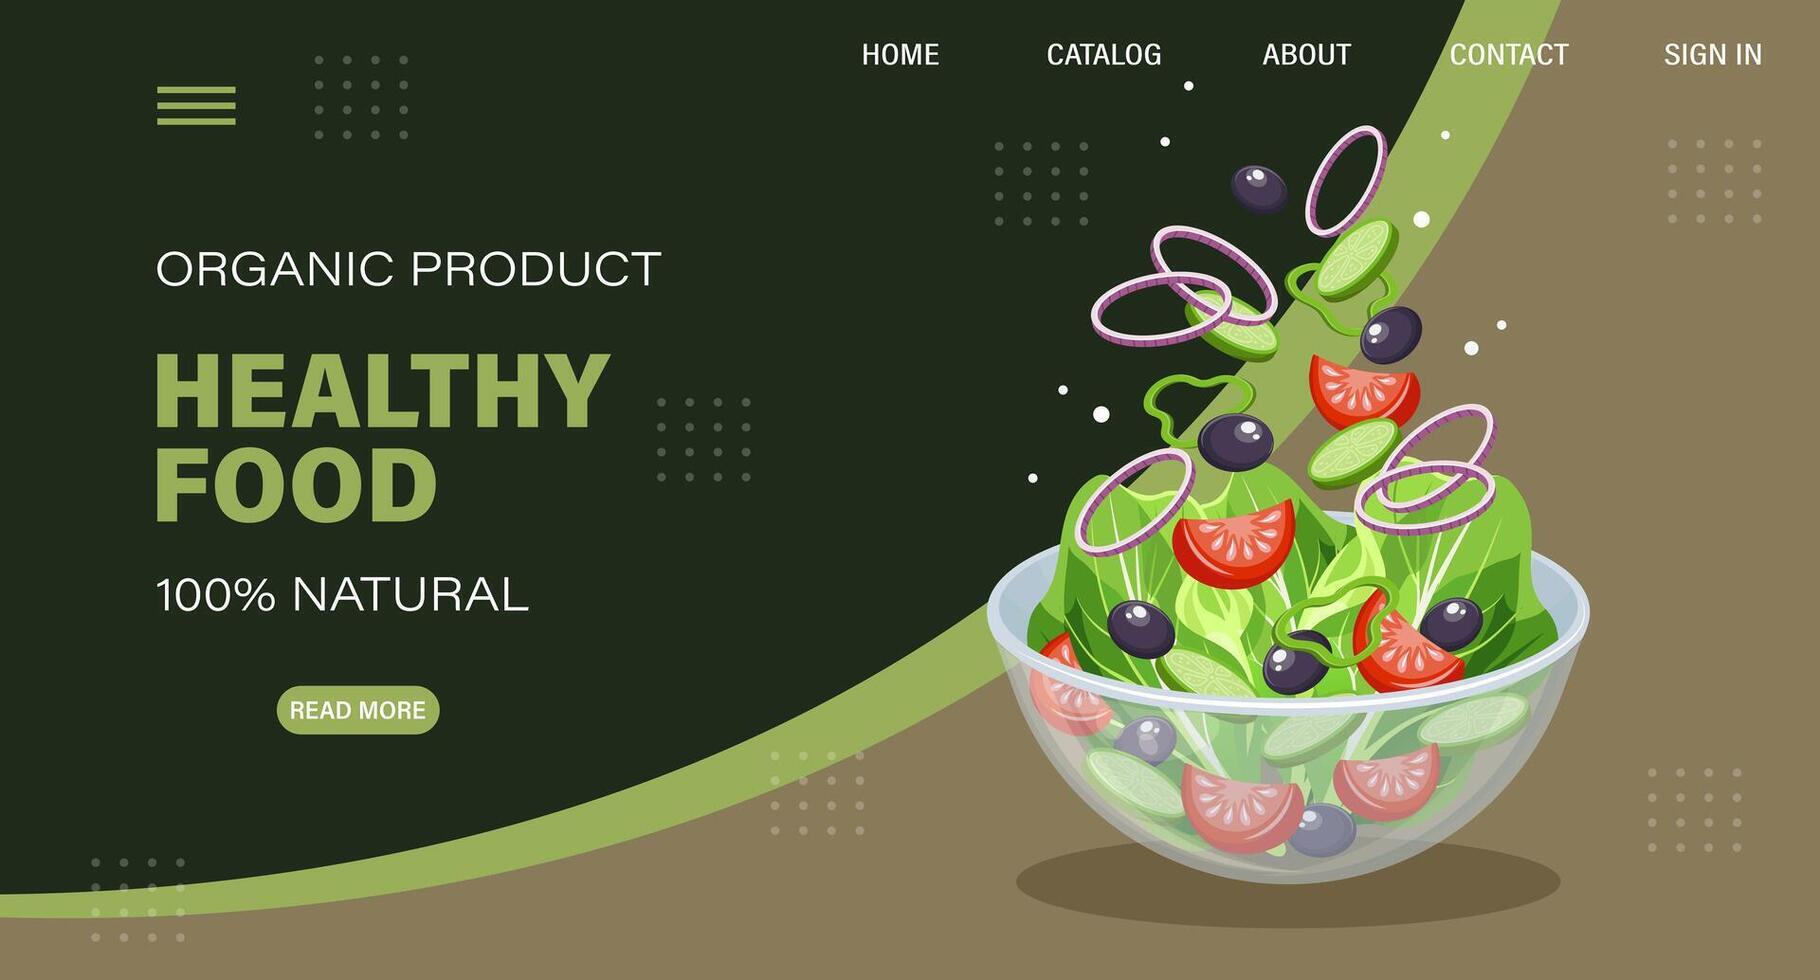 Web page design template for fresh vegetables, natural products, organic food, online food delivery, recipes. Illustration, landing page, poster, banner. vector